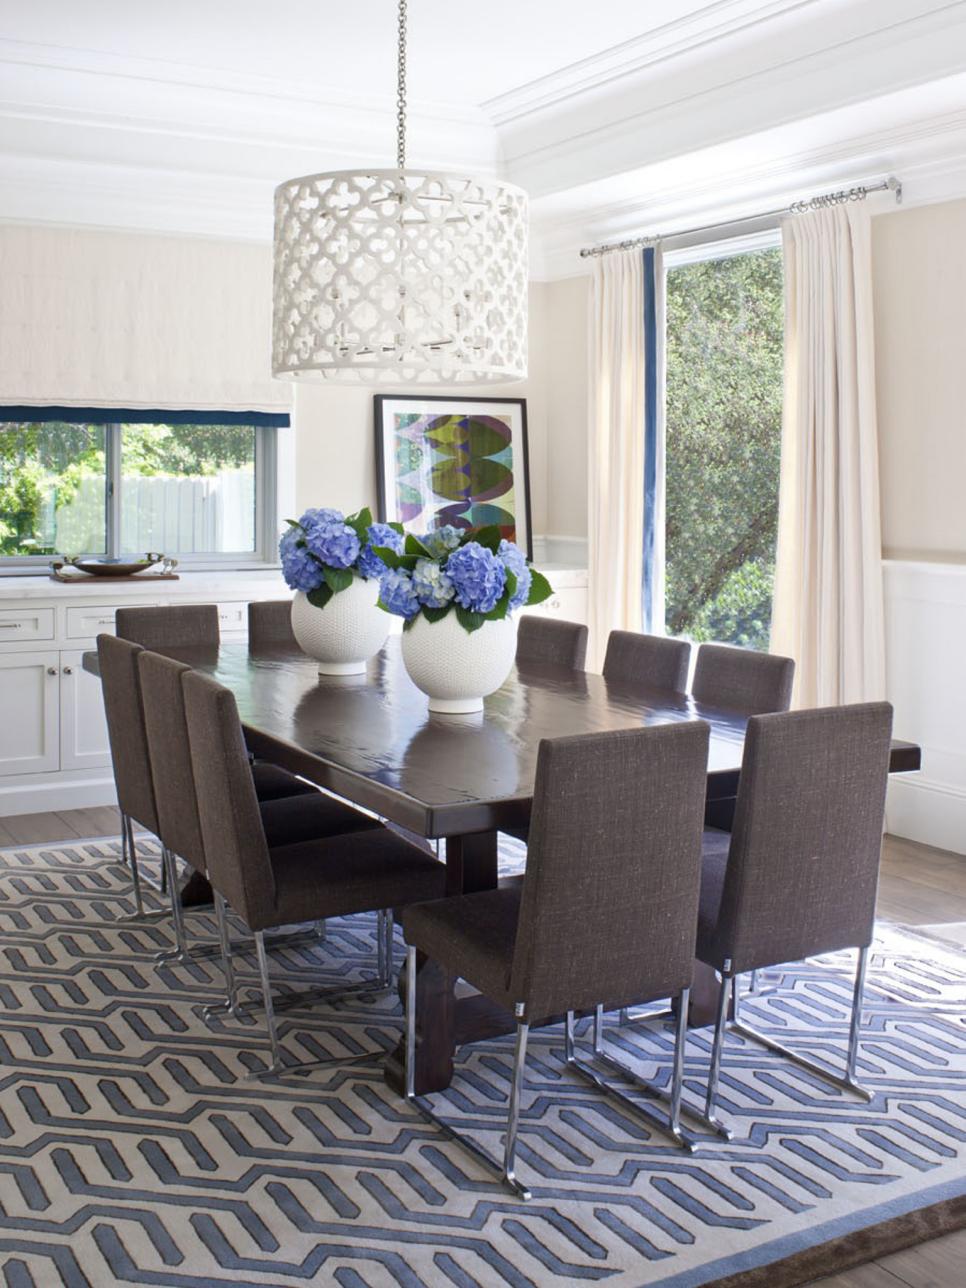 Transitional Dining Room With Blue and White Accents 